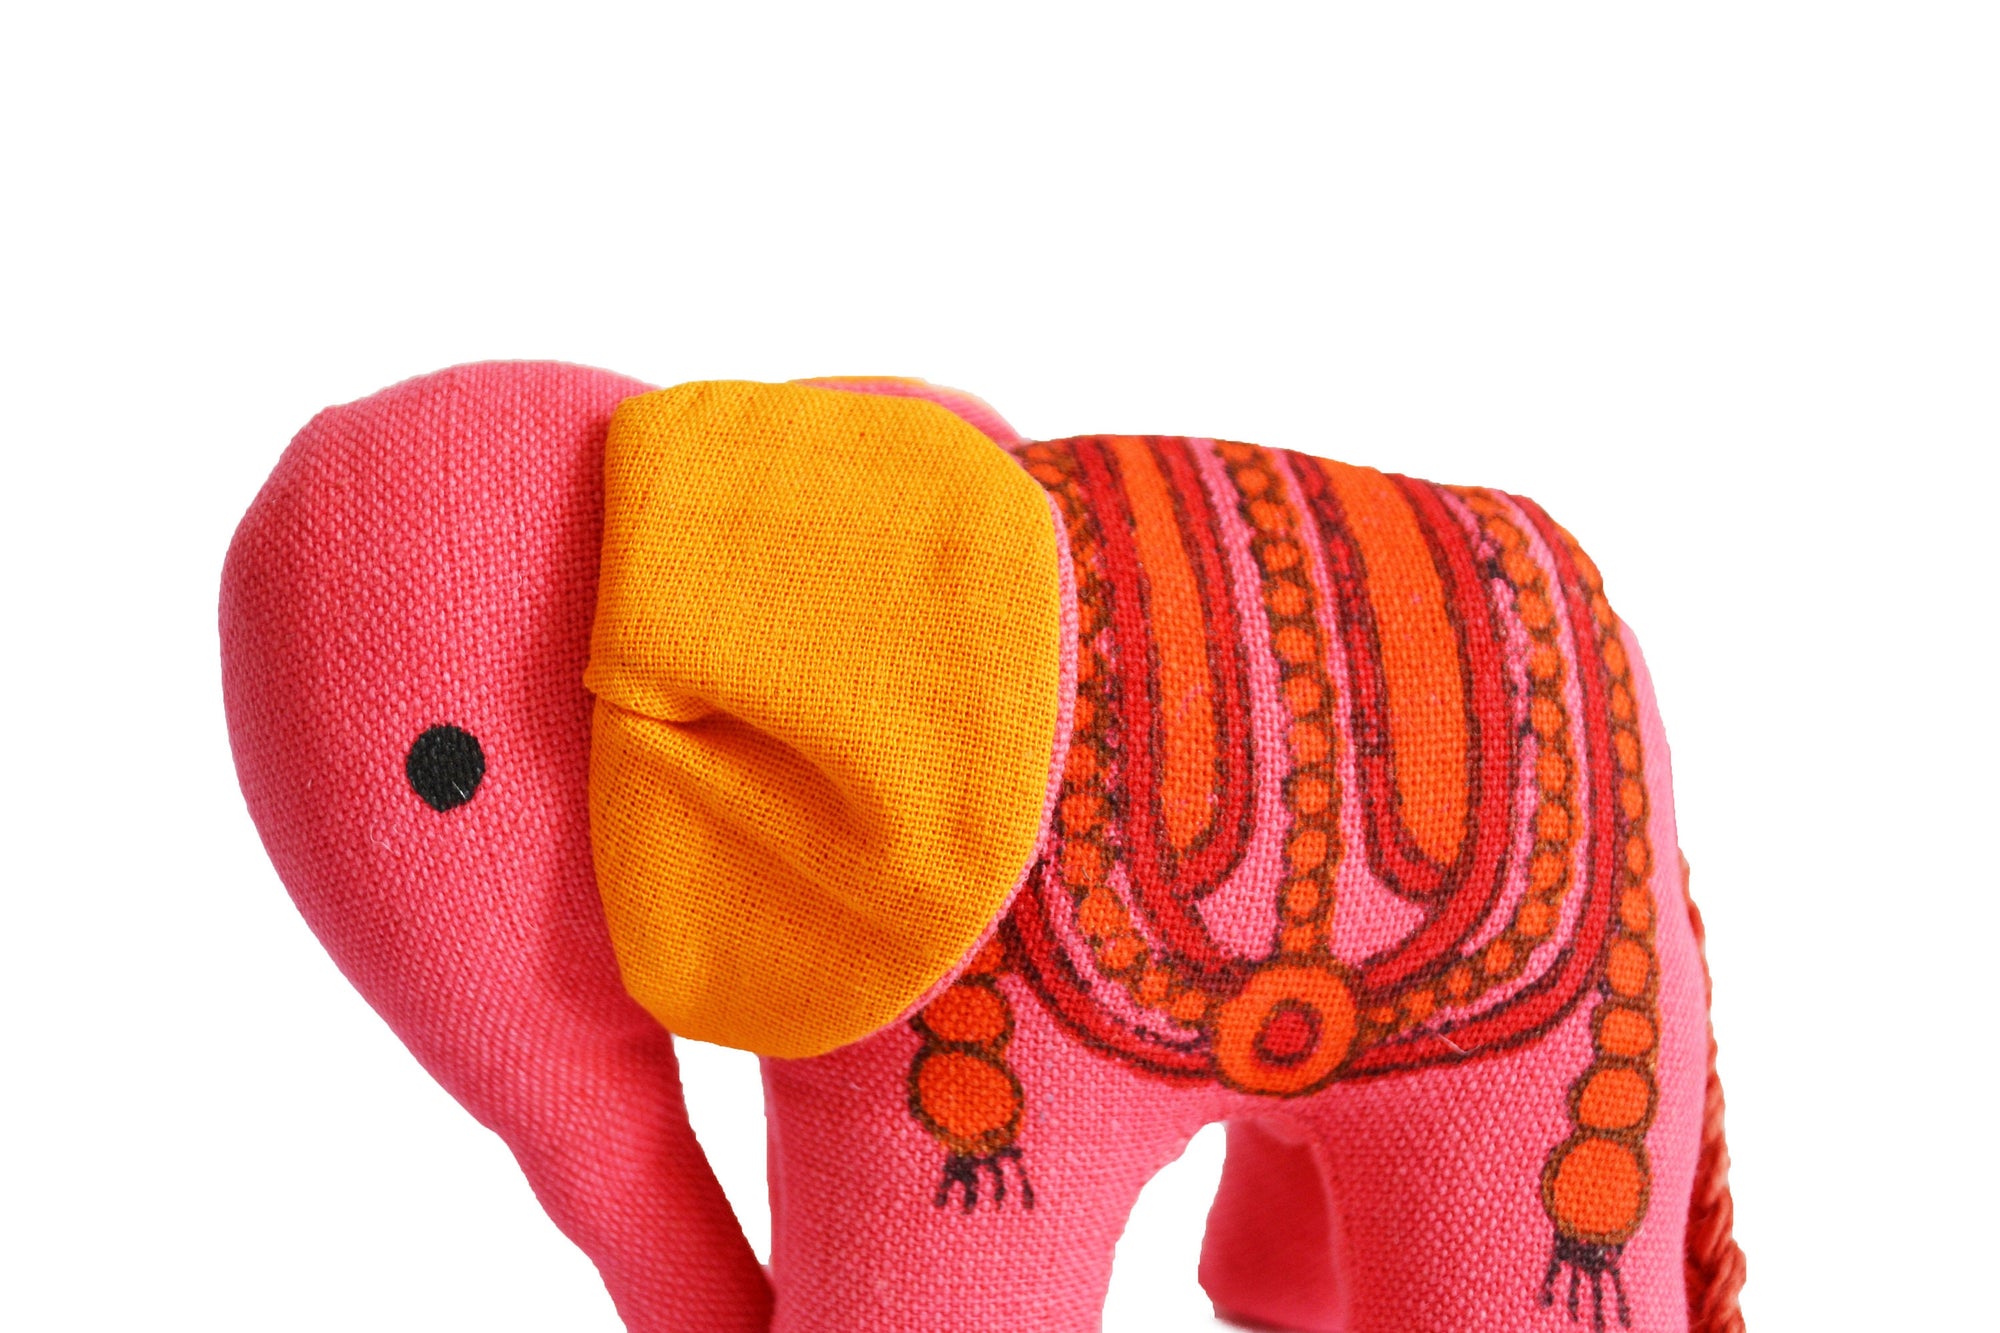 Fabric Toys - Camels - Pretend & Play, Plush/Soft Toy - Handmade Unisex Toys for Babies, Kids, Adults